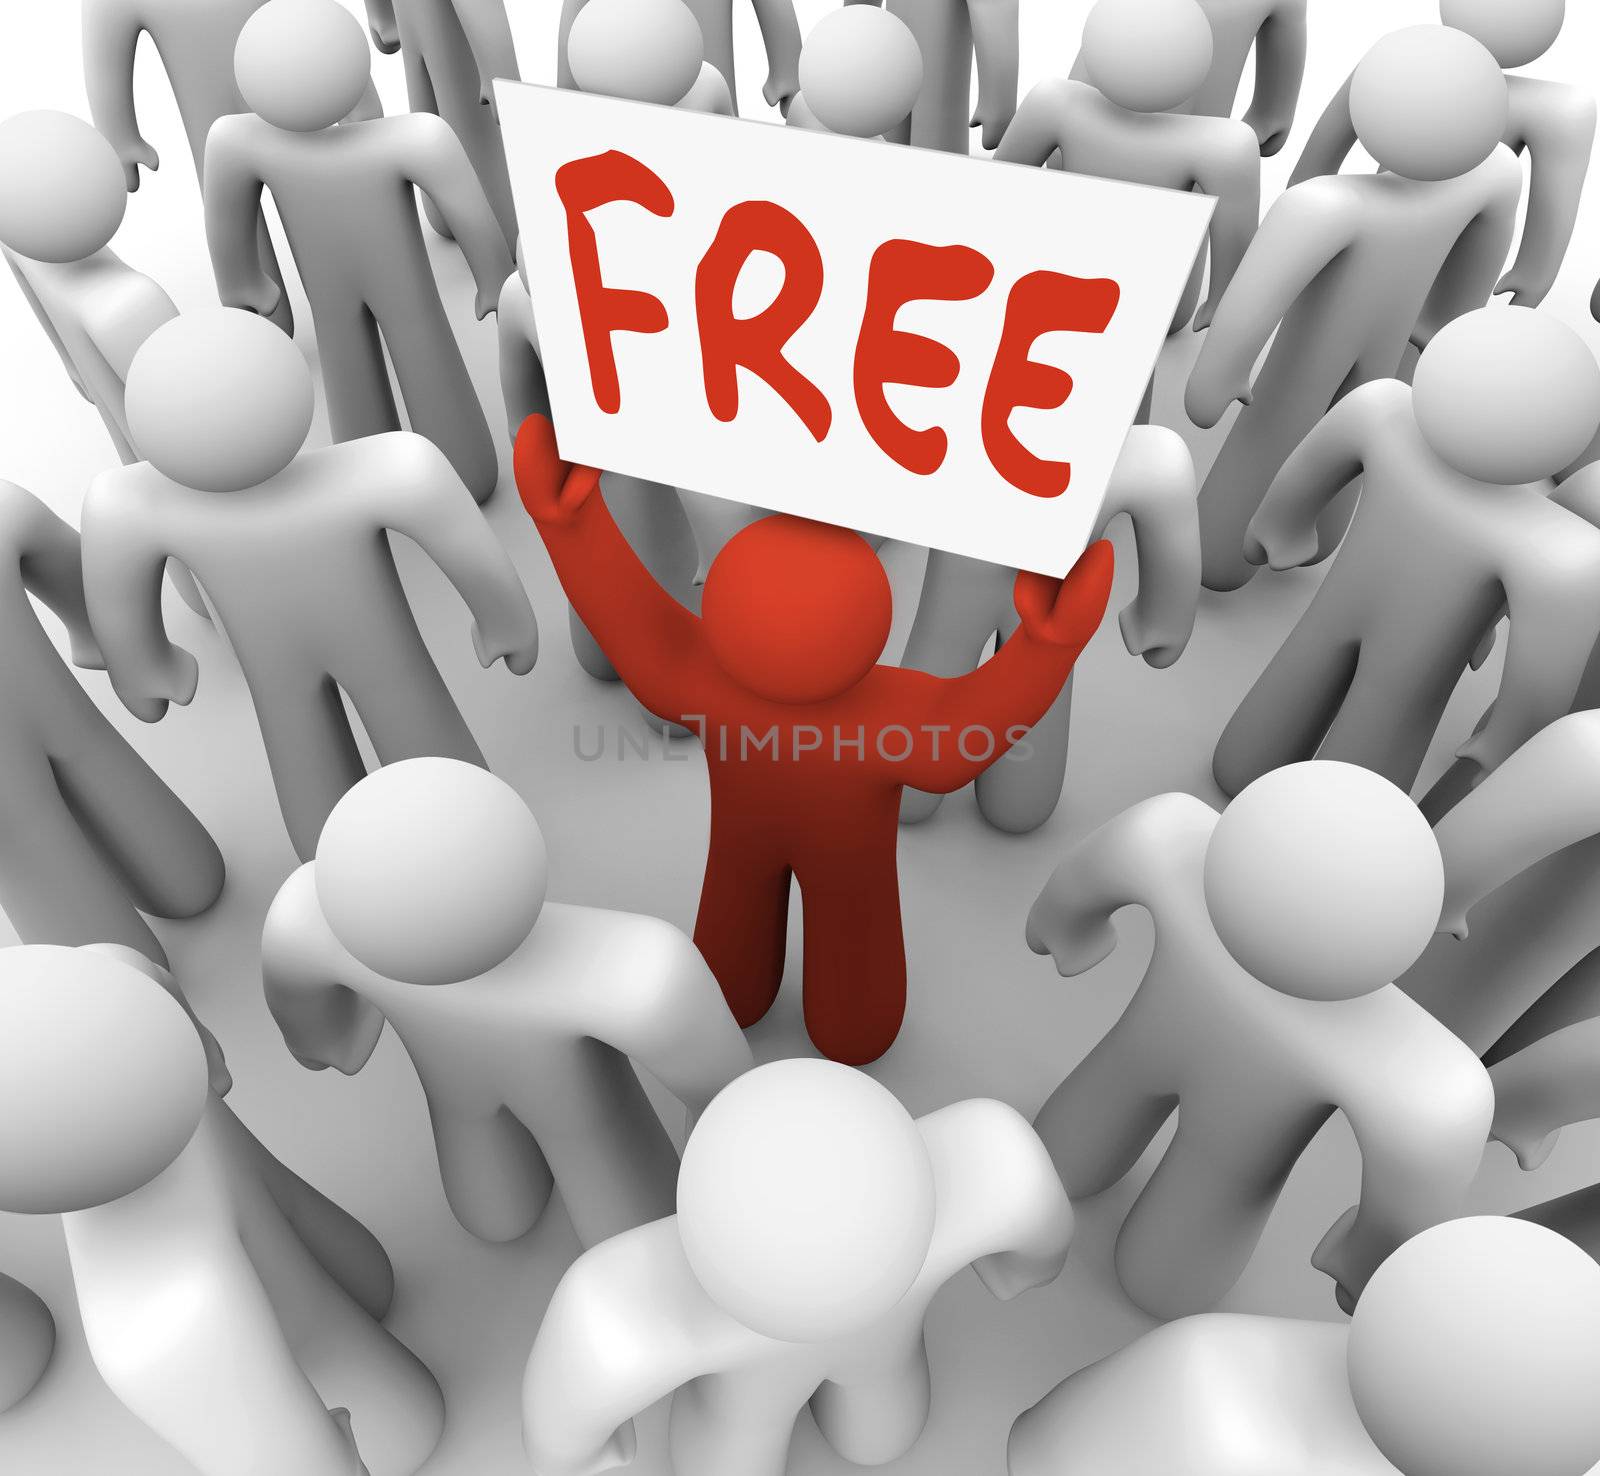 The word free on a banner sign held by a unique red man in a crowd of people, attracting customers for a special sale or giveaway event at a store or business